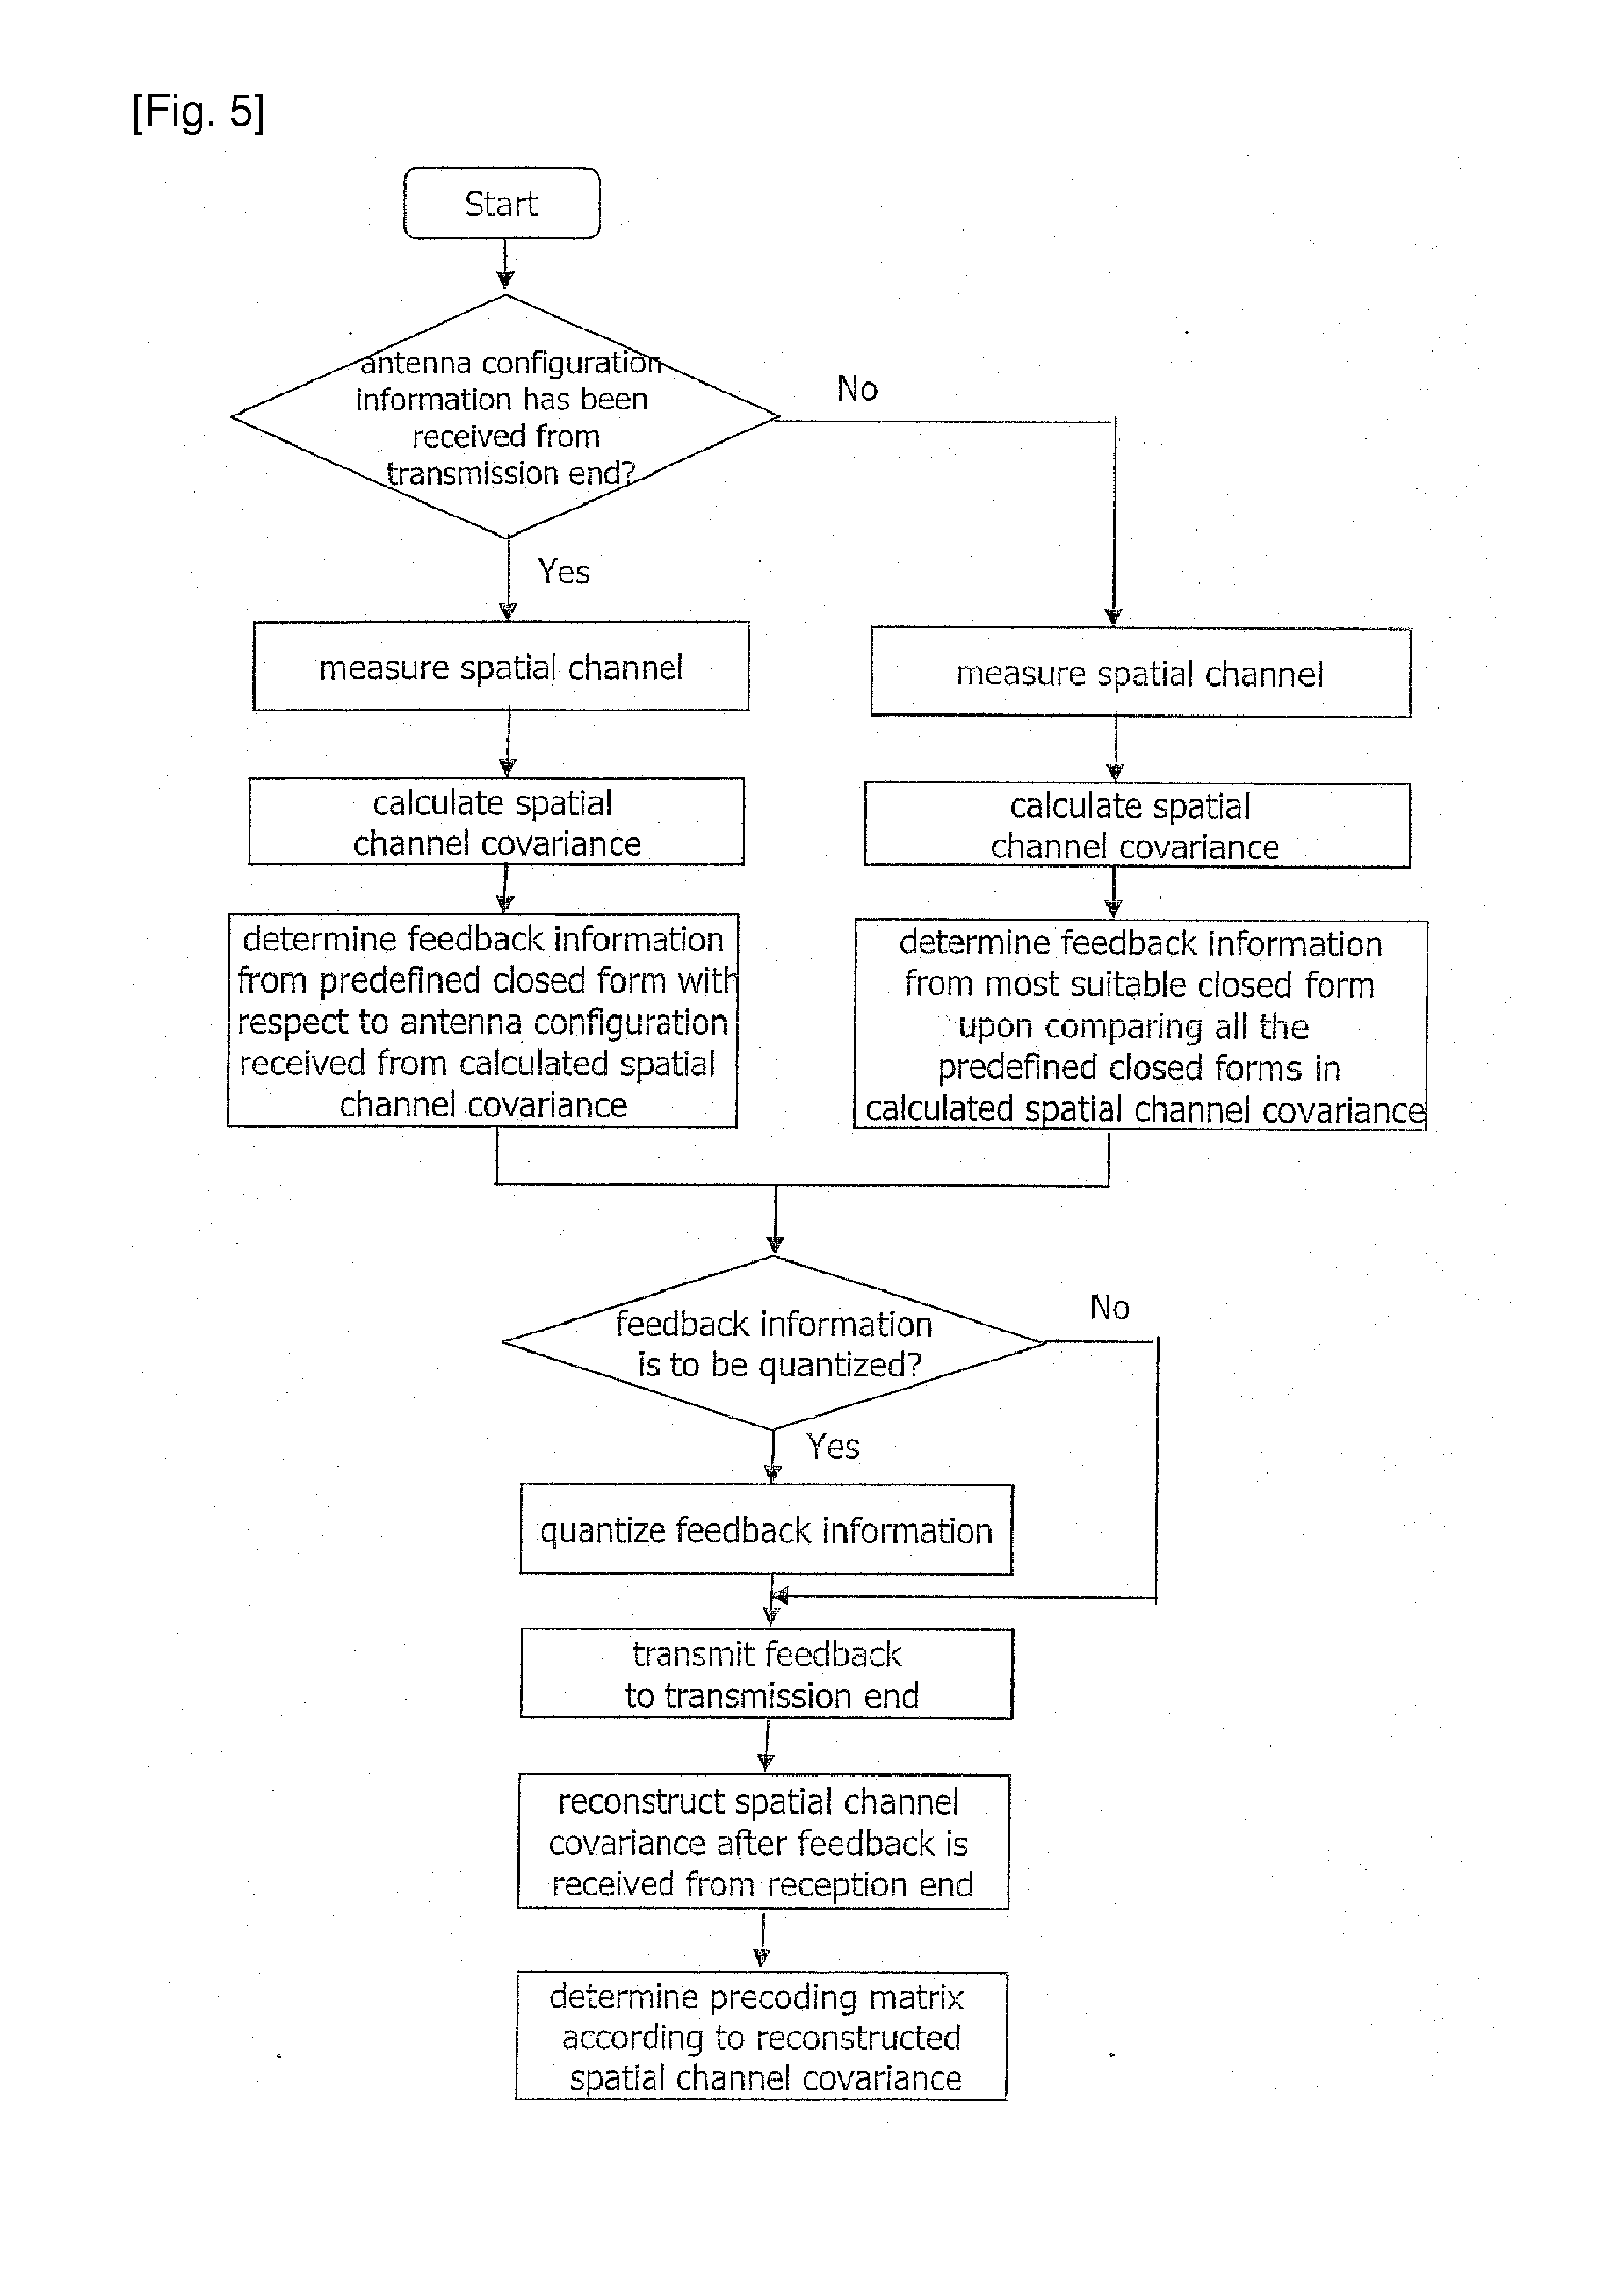 Method of Minimizing Feedback Overhead Using Spatial Channel Covariance in a Multi-Input Multi-Output System